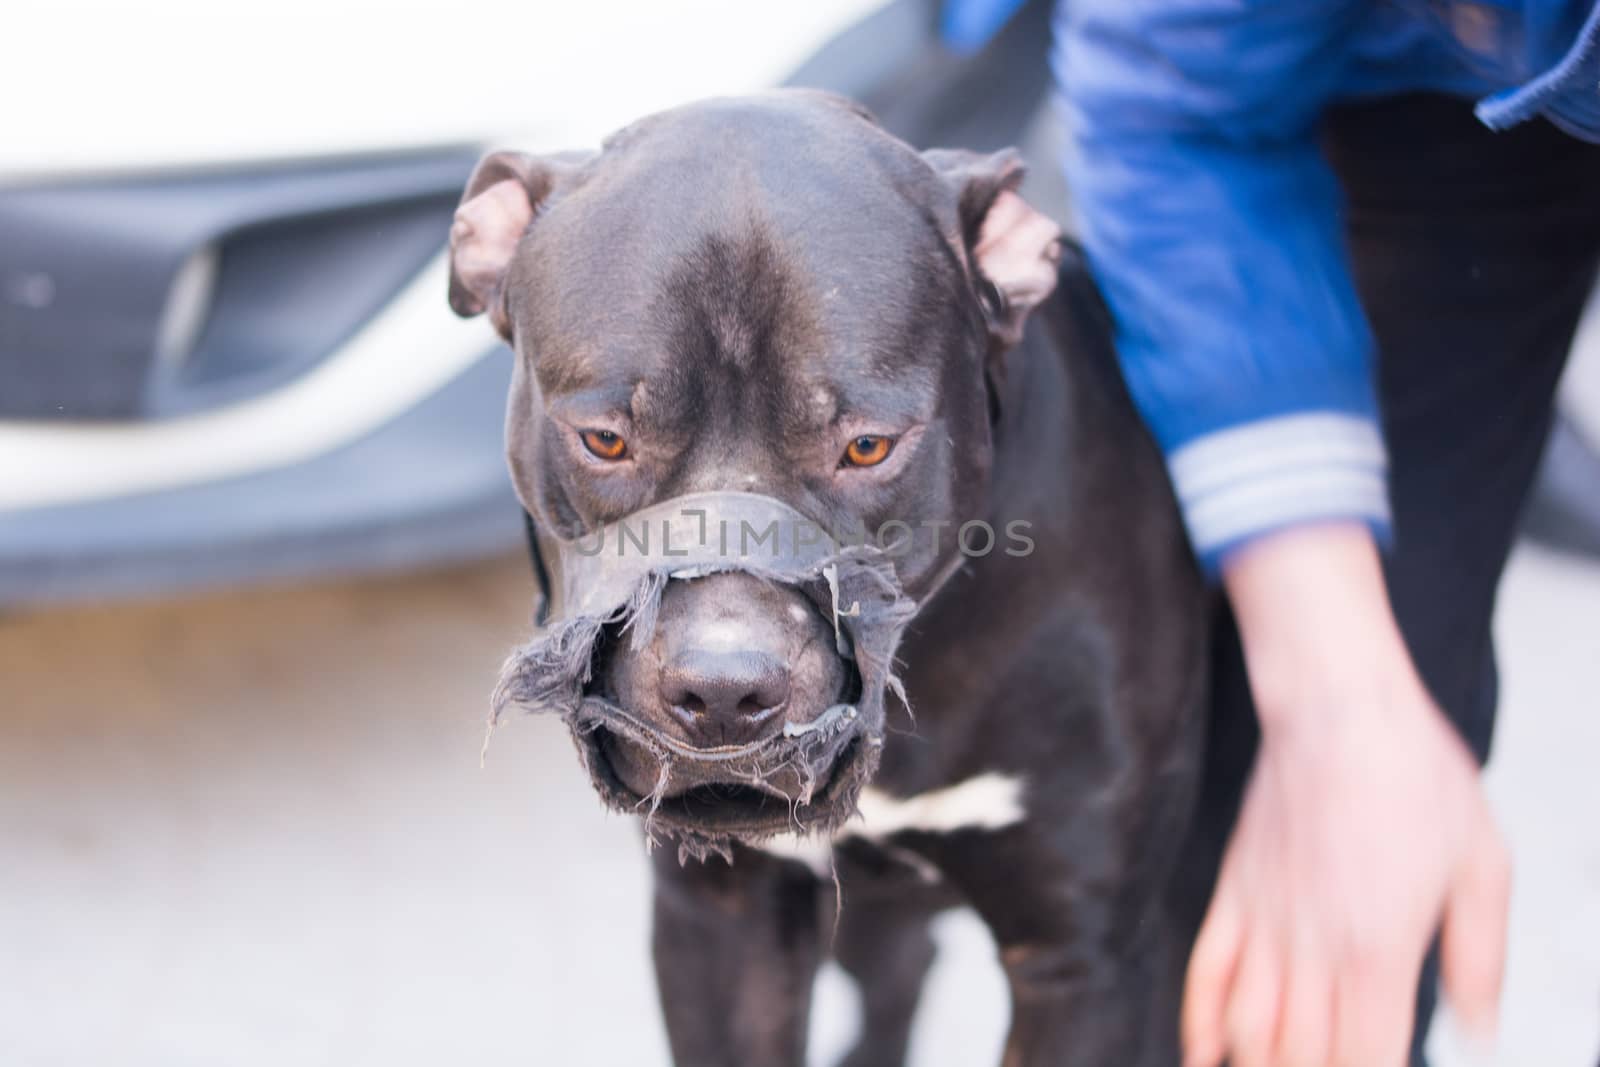 Pitbull dog looks quite dangerous. dog mouthpiece fitted.not to bite in the event of an attack